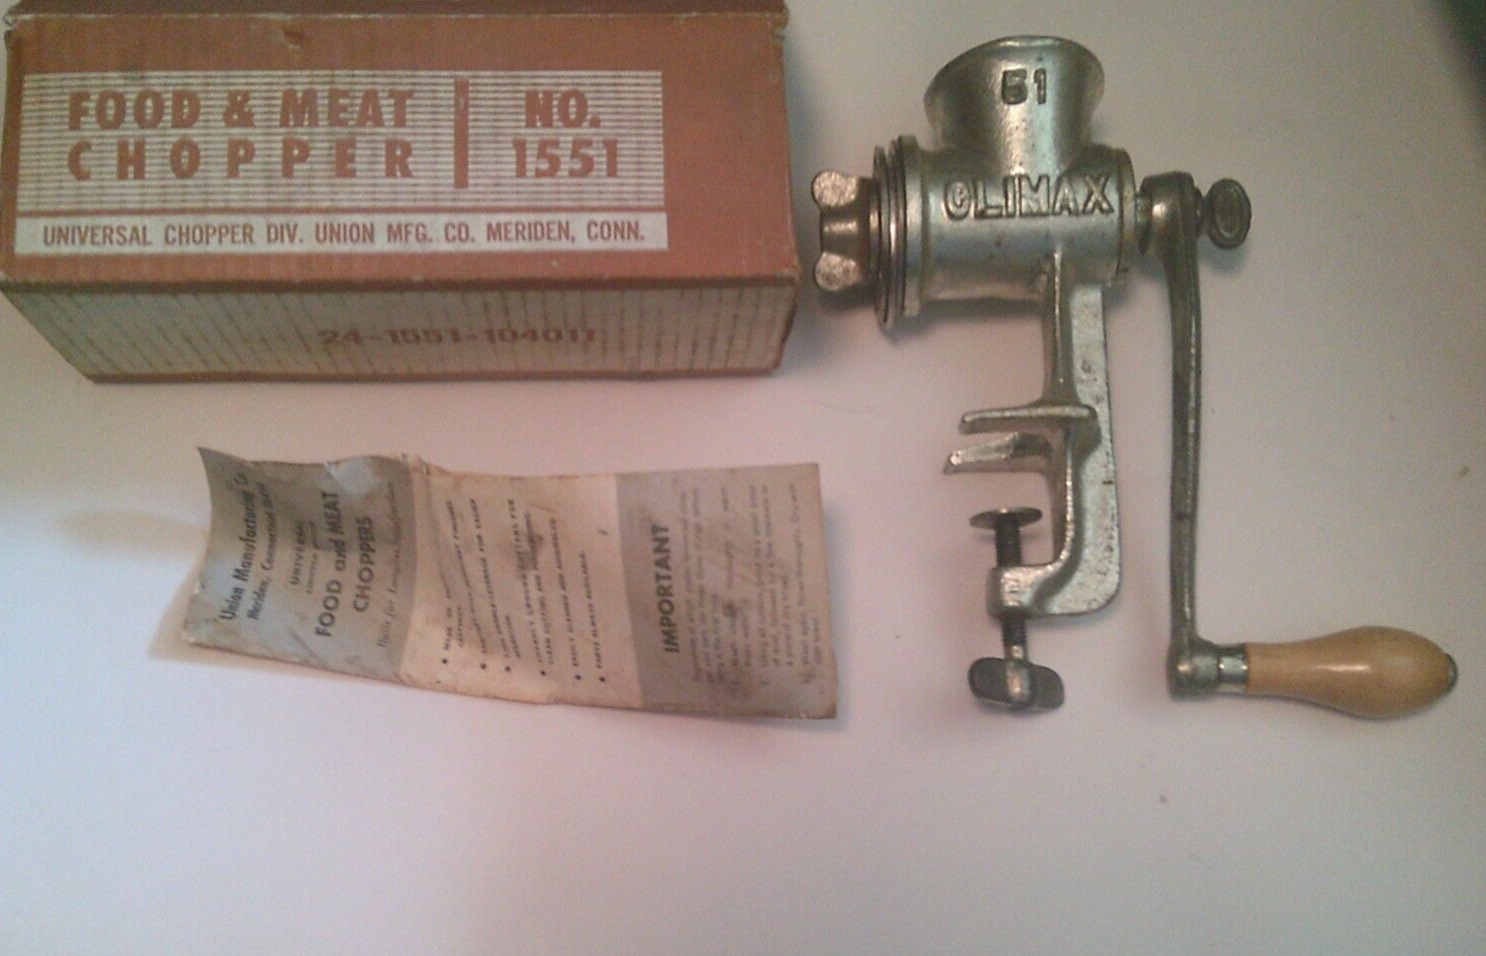 Vintage Universal Food And Meat Chopper No. 1551 Original Box Manual Climax #51